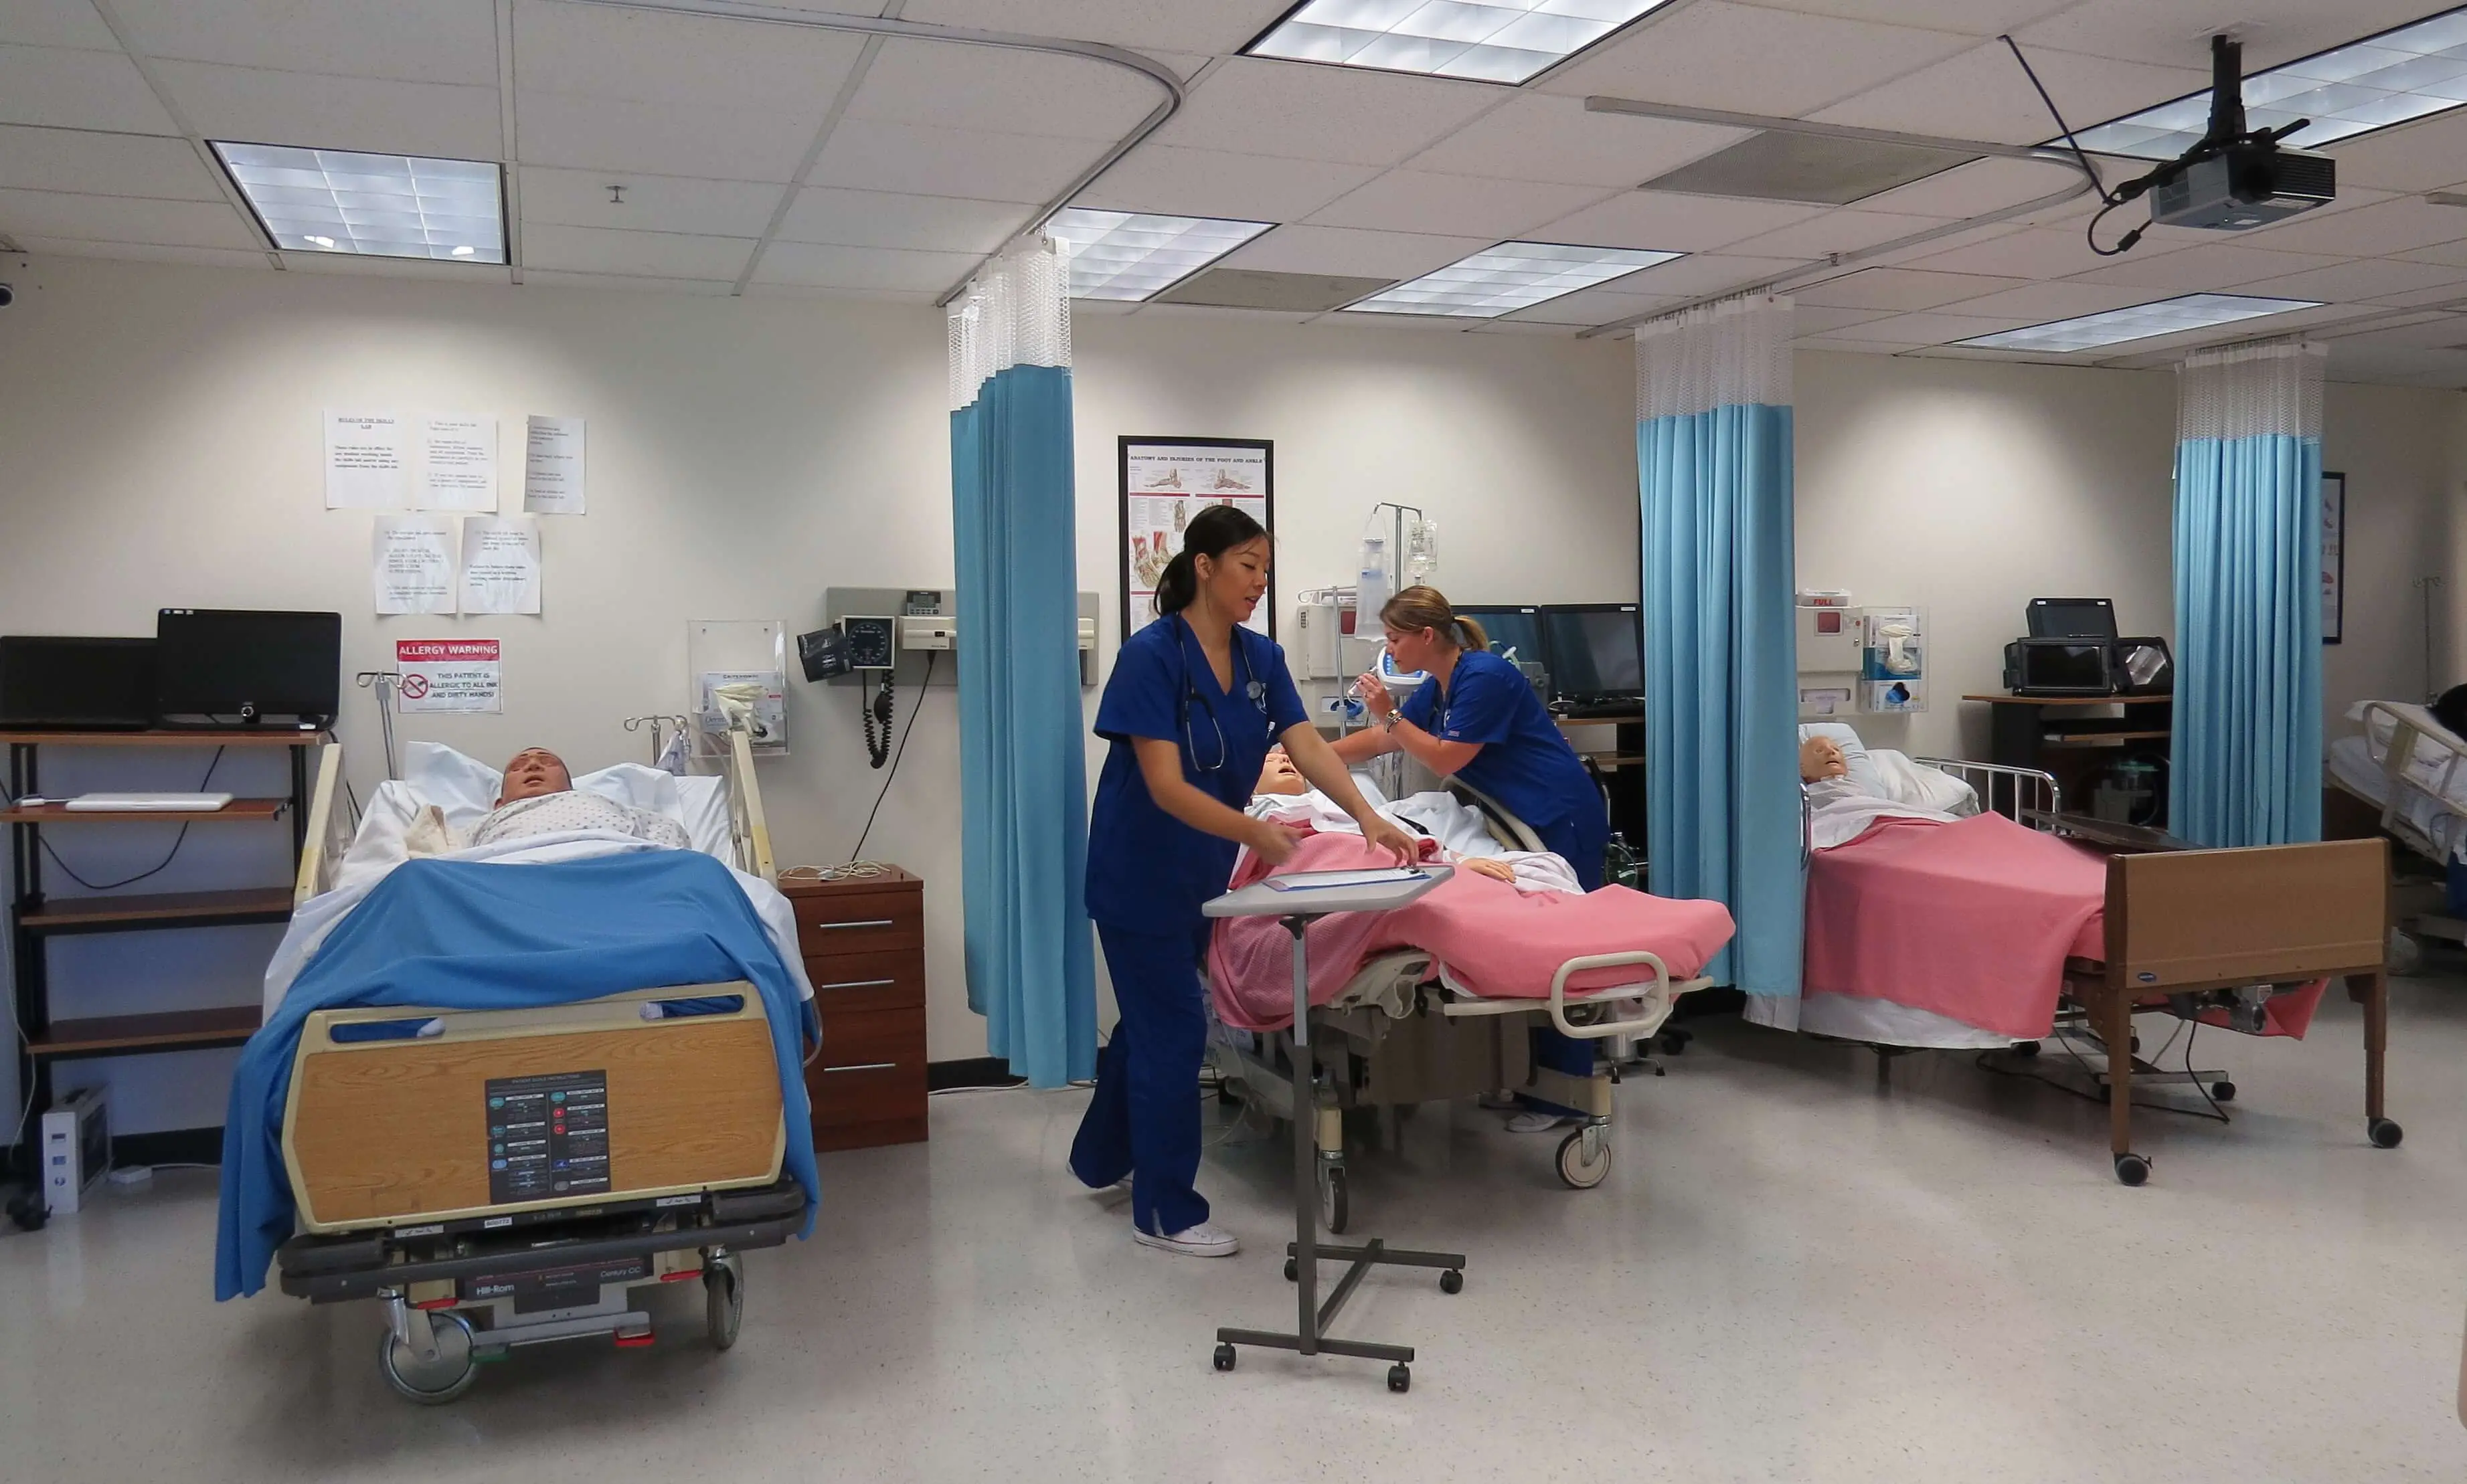 Career Demands Make the VN Program an Excellent Choice for these LVN Students | Gurnick Academy of Medical Arts